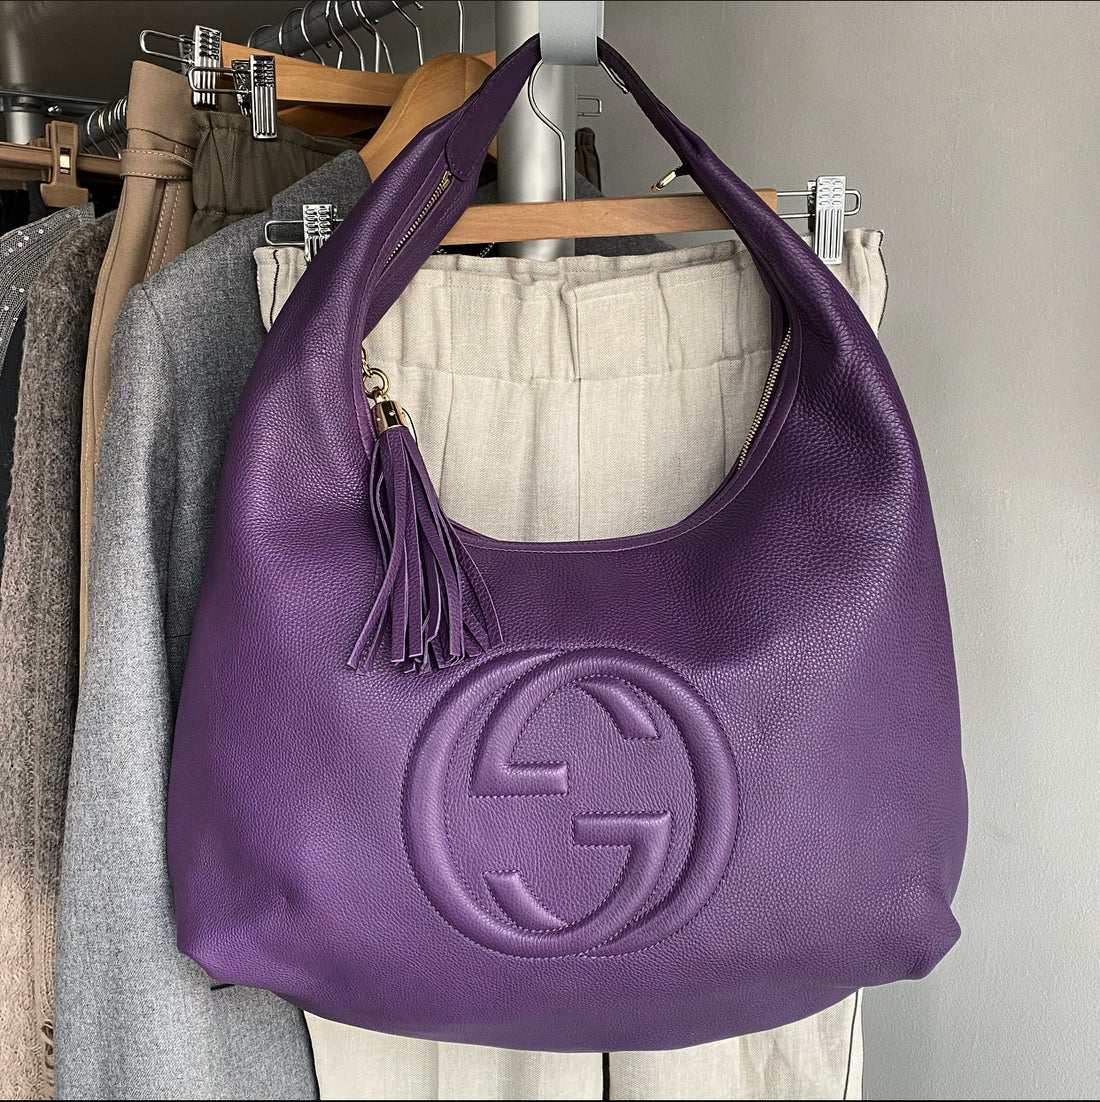 Gucci Hand Bag Purple Leather 1267191 - International Society of  Hypertension